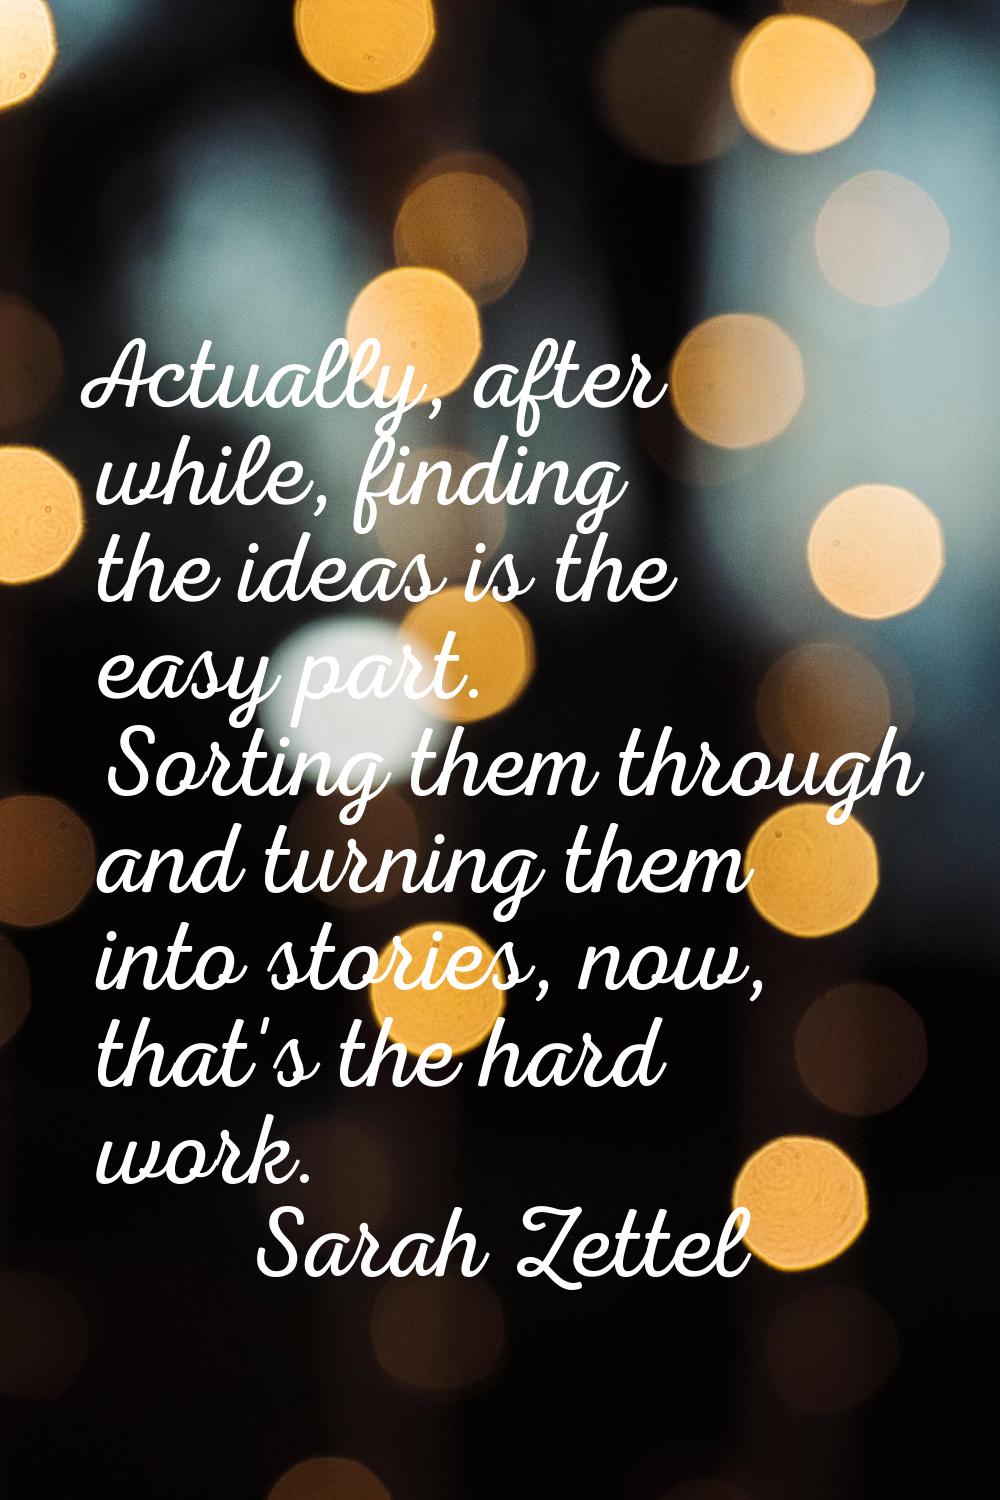 Actually, after while, finding the ideas is the easy part. Sorting them through and turning them in